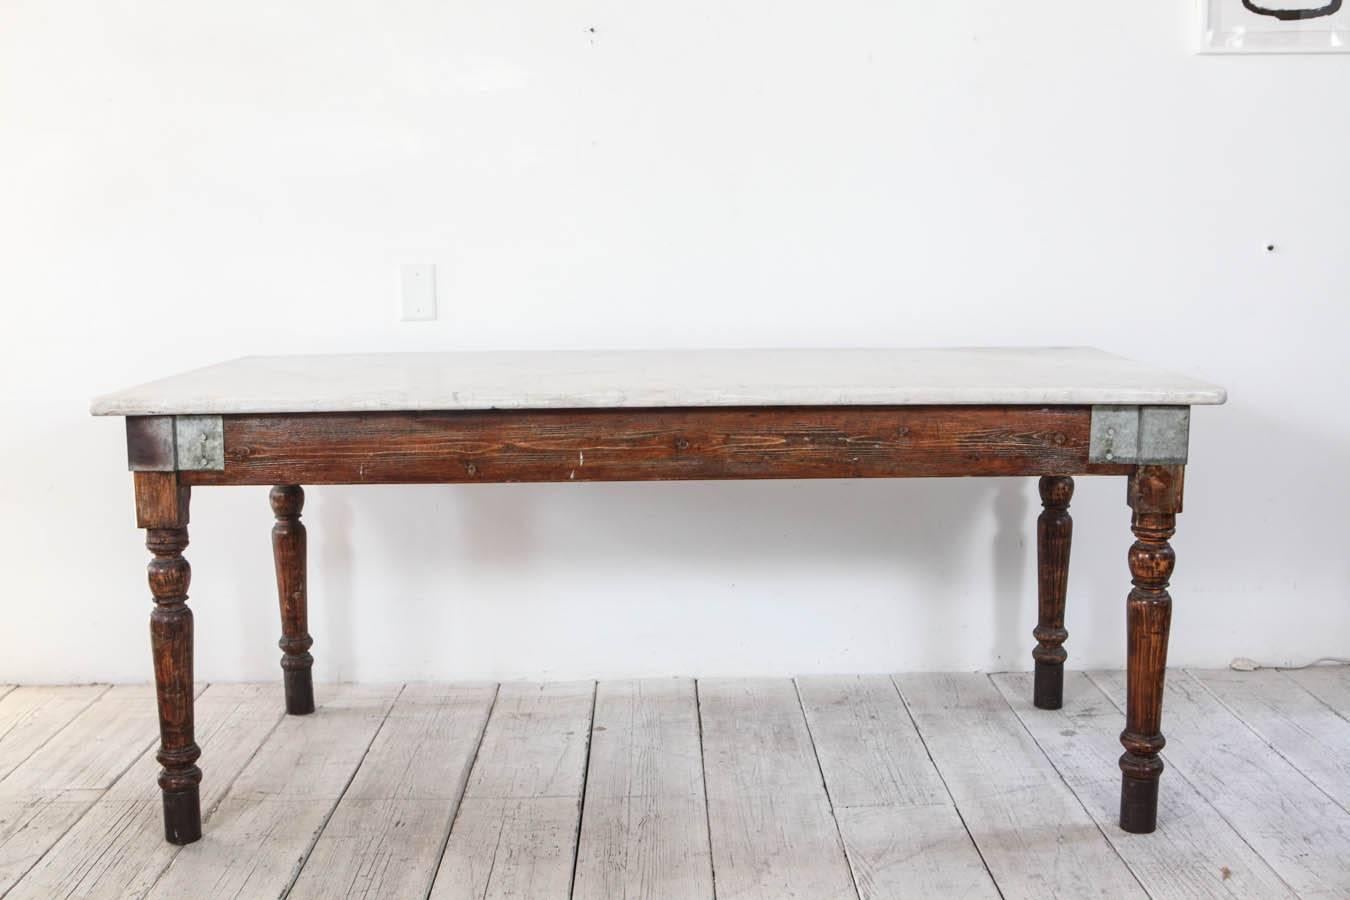 Vintage farm / work table with zinc metal details on corners and white likely Carrara marble top with beautiful patina.